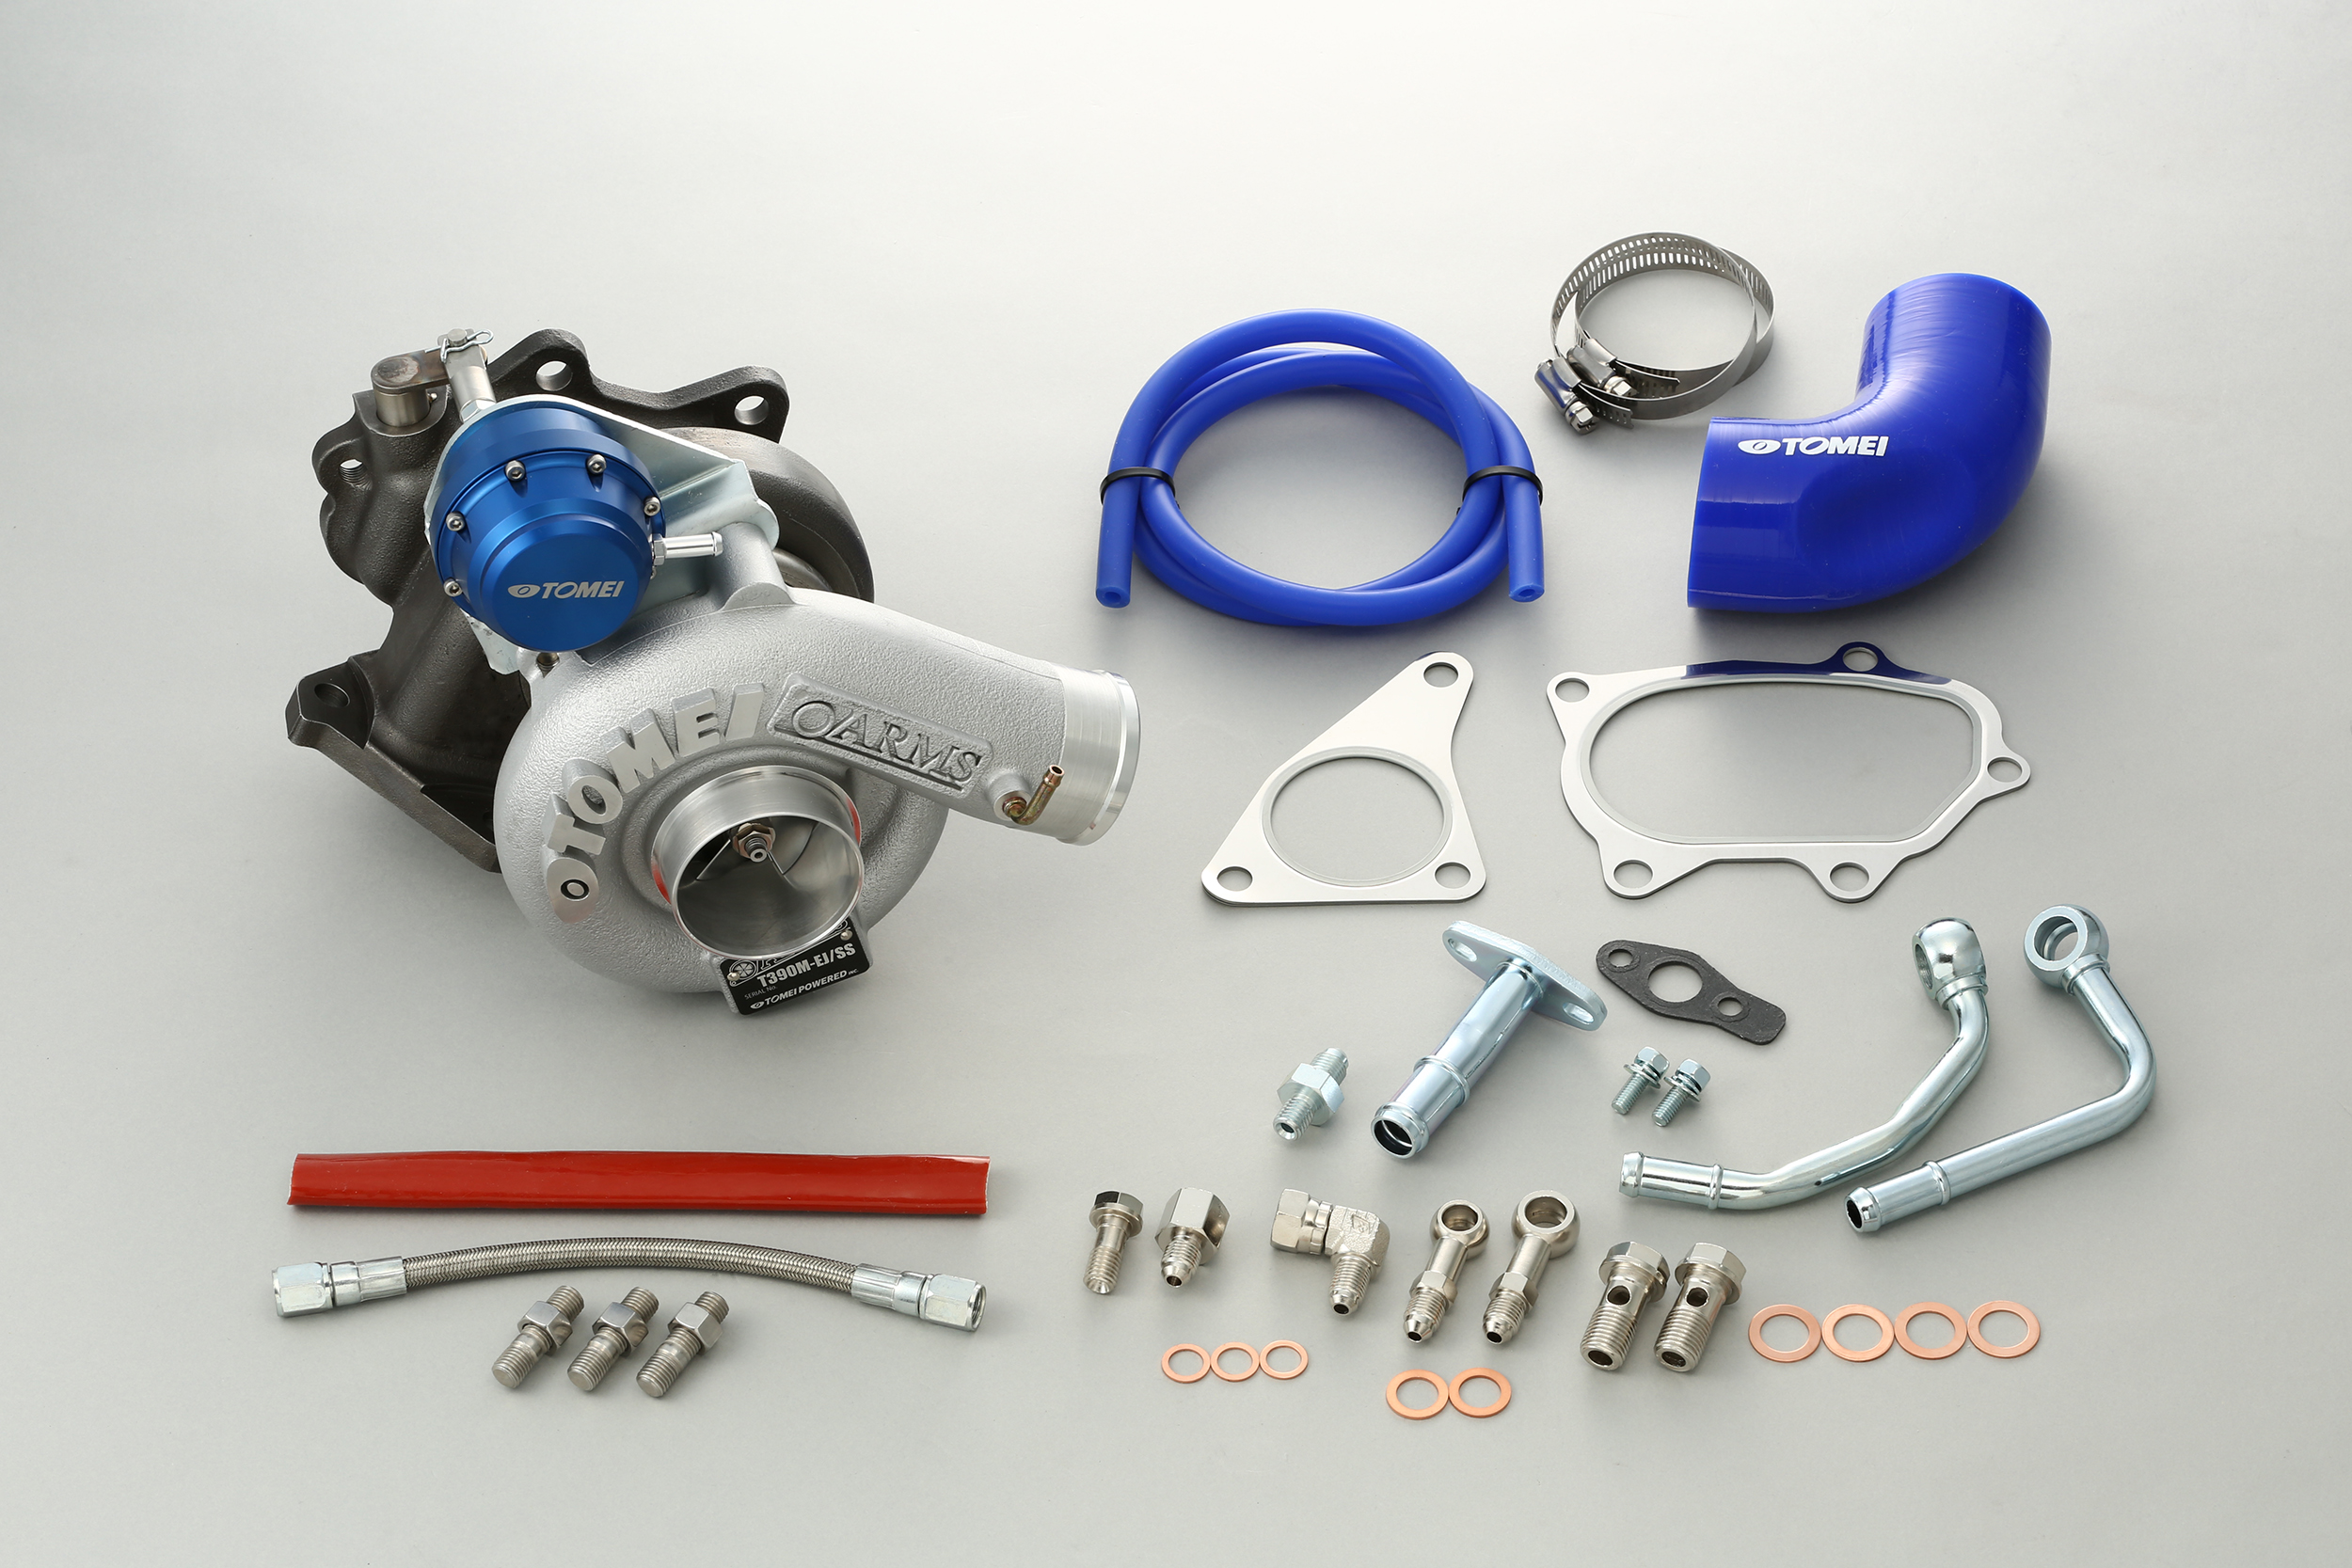 ARMS T390M/T440M SINGLE SCROLL TURBINE KIT for EJ － TOMEI POWERED